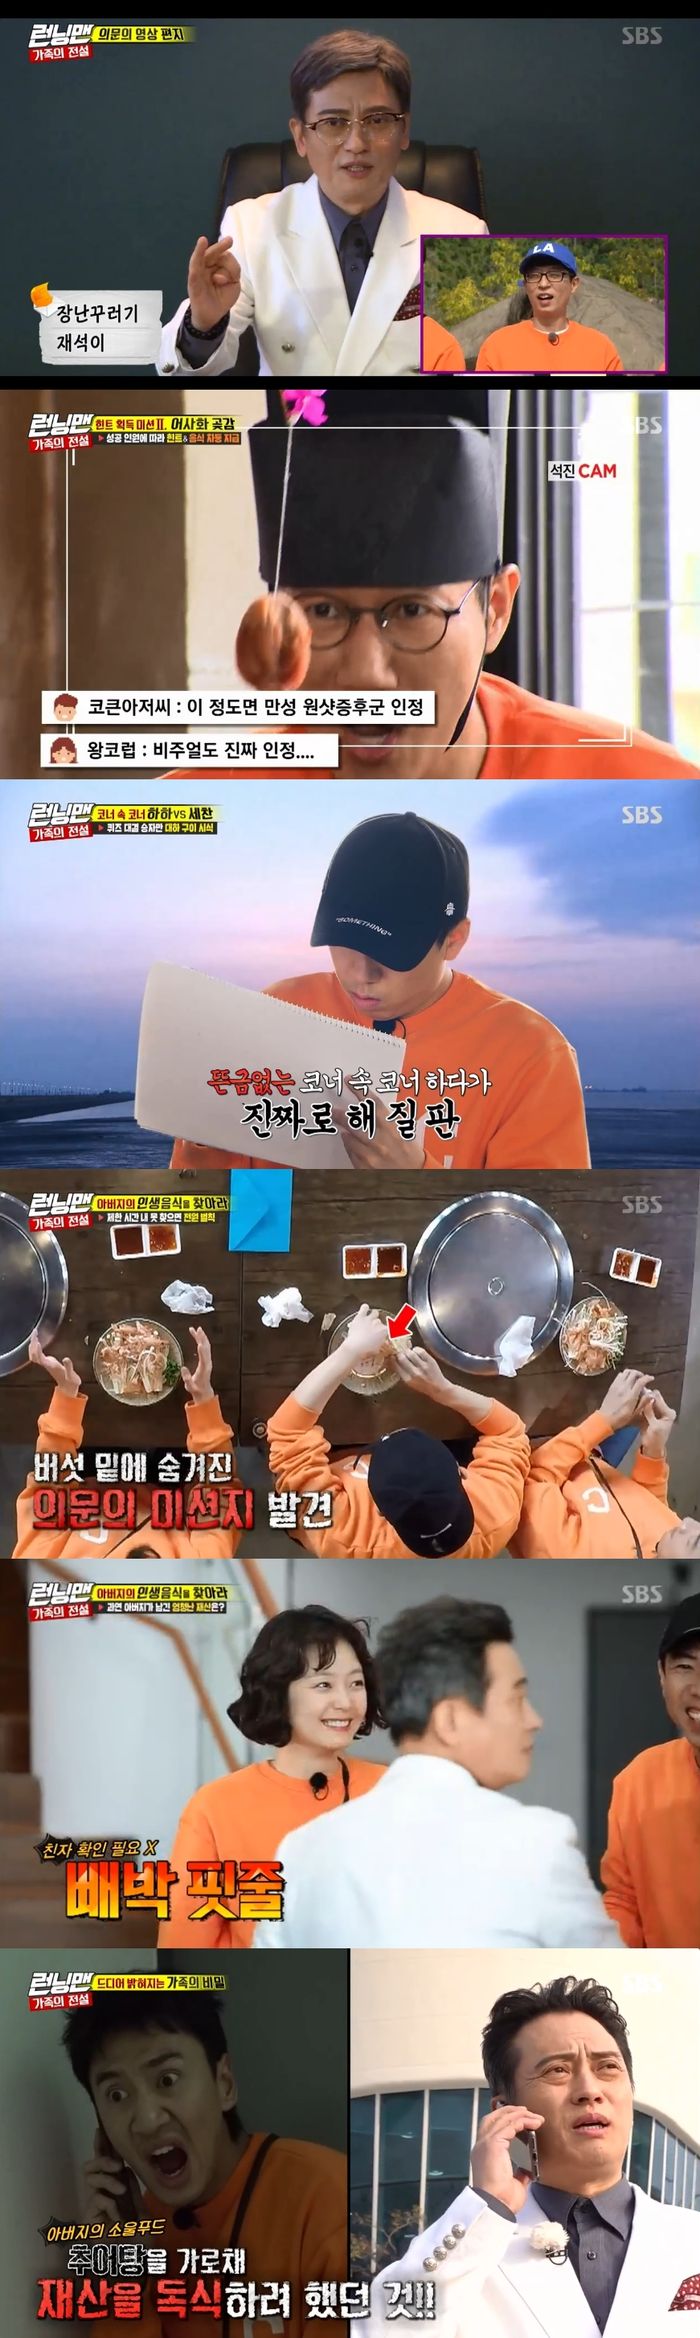 Haha, Song Ji-hyo and Lee Kwang-soo failed to get the commission.On SBS Running Man broadcast on the 11th, members who became Brother and Sister on the Family Legend side performed a mission to find the life food of their father Kim Byeong-okHe performed his first mission to get a hint.The members had to answer the same question, and the members all picked up Lee Kwang-soo and got a hint when asked Who is the betrayer of the Running Man member?The first hint was that food ingredients were in the water, and the members cited Daeha as food ingredients, considering that it was autumn.The Running Man members shouted Daeha Gui as the life food of their father Kim Byeong-ok, but it was not the right answer.Subsequently, he challenged the mission to eat dried persimmons to get hints.The hint that I succeeded in eating dried persimmons came out, I was afraid to touch this material when I was young.Kim Jong-kook was eliminated after playing a game to pick two people who could not eat the grill.At this time, Haha and Yang Se-chan also went to a queezing showdown to pick the final one, so Yoo Jae-Suk had a problem to write down the capital of Mongolia.Haha wrote the correct answer to Ulaanbaatar and ate the grilled grill, and Yang Se-chan laughed as Olandobutu.The members had to perform a mission to find life dishes before sunset, so they finished their meal in a hurry. Then Haha found a questionable mission under his dish.After that, Haha quipped to the members who suspected him, I think there is a person who is not a brother in us.The members then moved to check the correct answer to the crab, but the steamed crab was not the life food of their father Kim Byeong-okTo get a hint, the members performed a ping-pong ball blow mission, which resulted in a bones.The members started to reason again, and the whole grill was given as the third answer. But the whole grill was not the right answer either.Running Man members who continued to get hints even got hints that I sometimes think of Ji Suk-jin.At that time, Yoo Jae-Suk came up with the nickname of Ji Suk-jin, Makuraji. The members met Kim Byeong-oks life food, saying, It is a churtang.Before sunset, Running Man members headed to where Kim Byeong-ok is.Kim Jong-kook was afraid of My father is a bum in Kim Byeong-oks force.Kim Byeong-ok said he had a former property on the third floor and said he would distribute it in order of first-come-first-served. The members rushed at full speed.Kim Jong-kook, who arrived at the top spot, checked the letter, which read: 9 Brother and Sister and Jean-nam Byeon-ok.Running Man members were surprised that they were big brothers, not fathers.Haha, Lee Kwang-soo, and Song Ji-hyo, who knew this fact in advance, followed Kim Byeong-ok on the first floor instead of going to the third floor.The real final mission was carried out by dividing them into such a large team and a brother team, which the brothers would have to catch before the big betrayer team sent the courier.The poisonous Brotherhood outed all of the big brother-in-laws Haha, Song Ji-hyo and Kim Byeong-ok; Lee Kwang-soo fled the members eyes.However, he was caught in the hiding Yoo Jae-Suk and Yang Se-chan dressed as VJ and torn the name tag.Lee Kwang-soo, who eventually dreamed of a Property monologue, was eliminated.